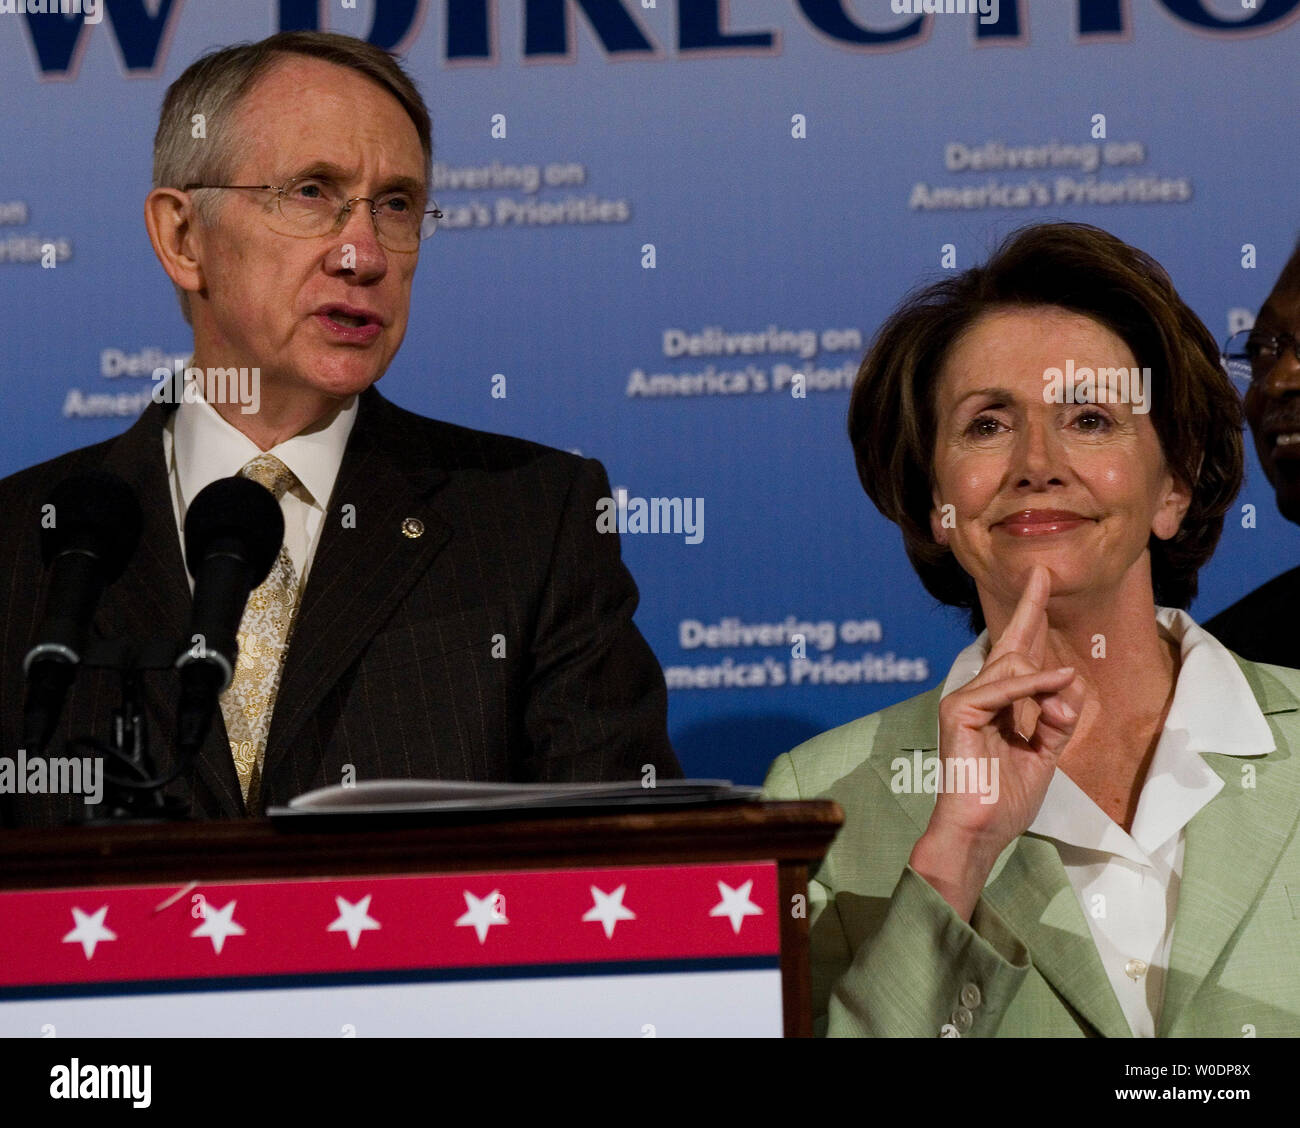 Speaker of the House Nancy Pelosi (D-CA) listens as Senate Majority Leader Harry Reid (D-NV) discusses the legislative accomplishments of and obstacles to the new Democratic Congress over the past six months on Capitol Hill in Washington on June 29, 2007.     (UPI Photo/David Brody) Stock Photo